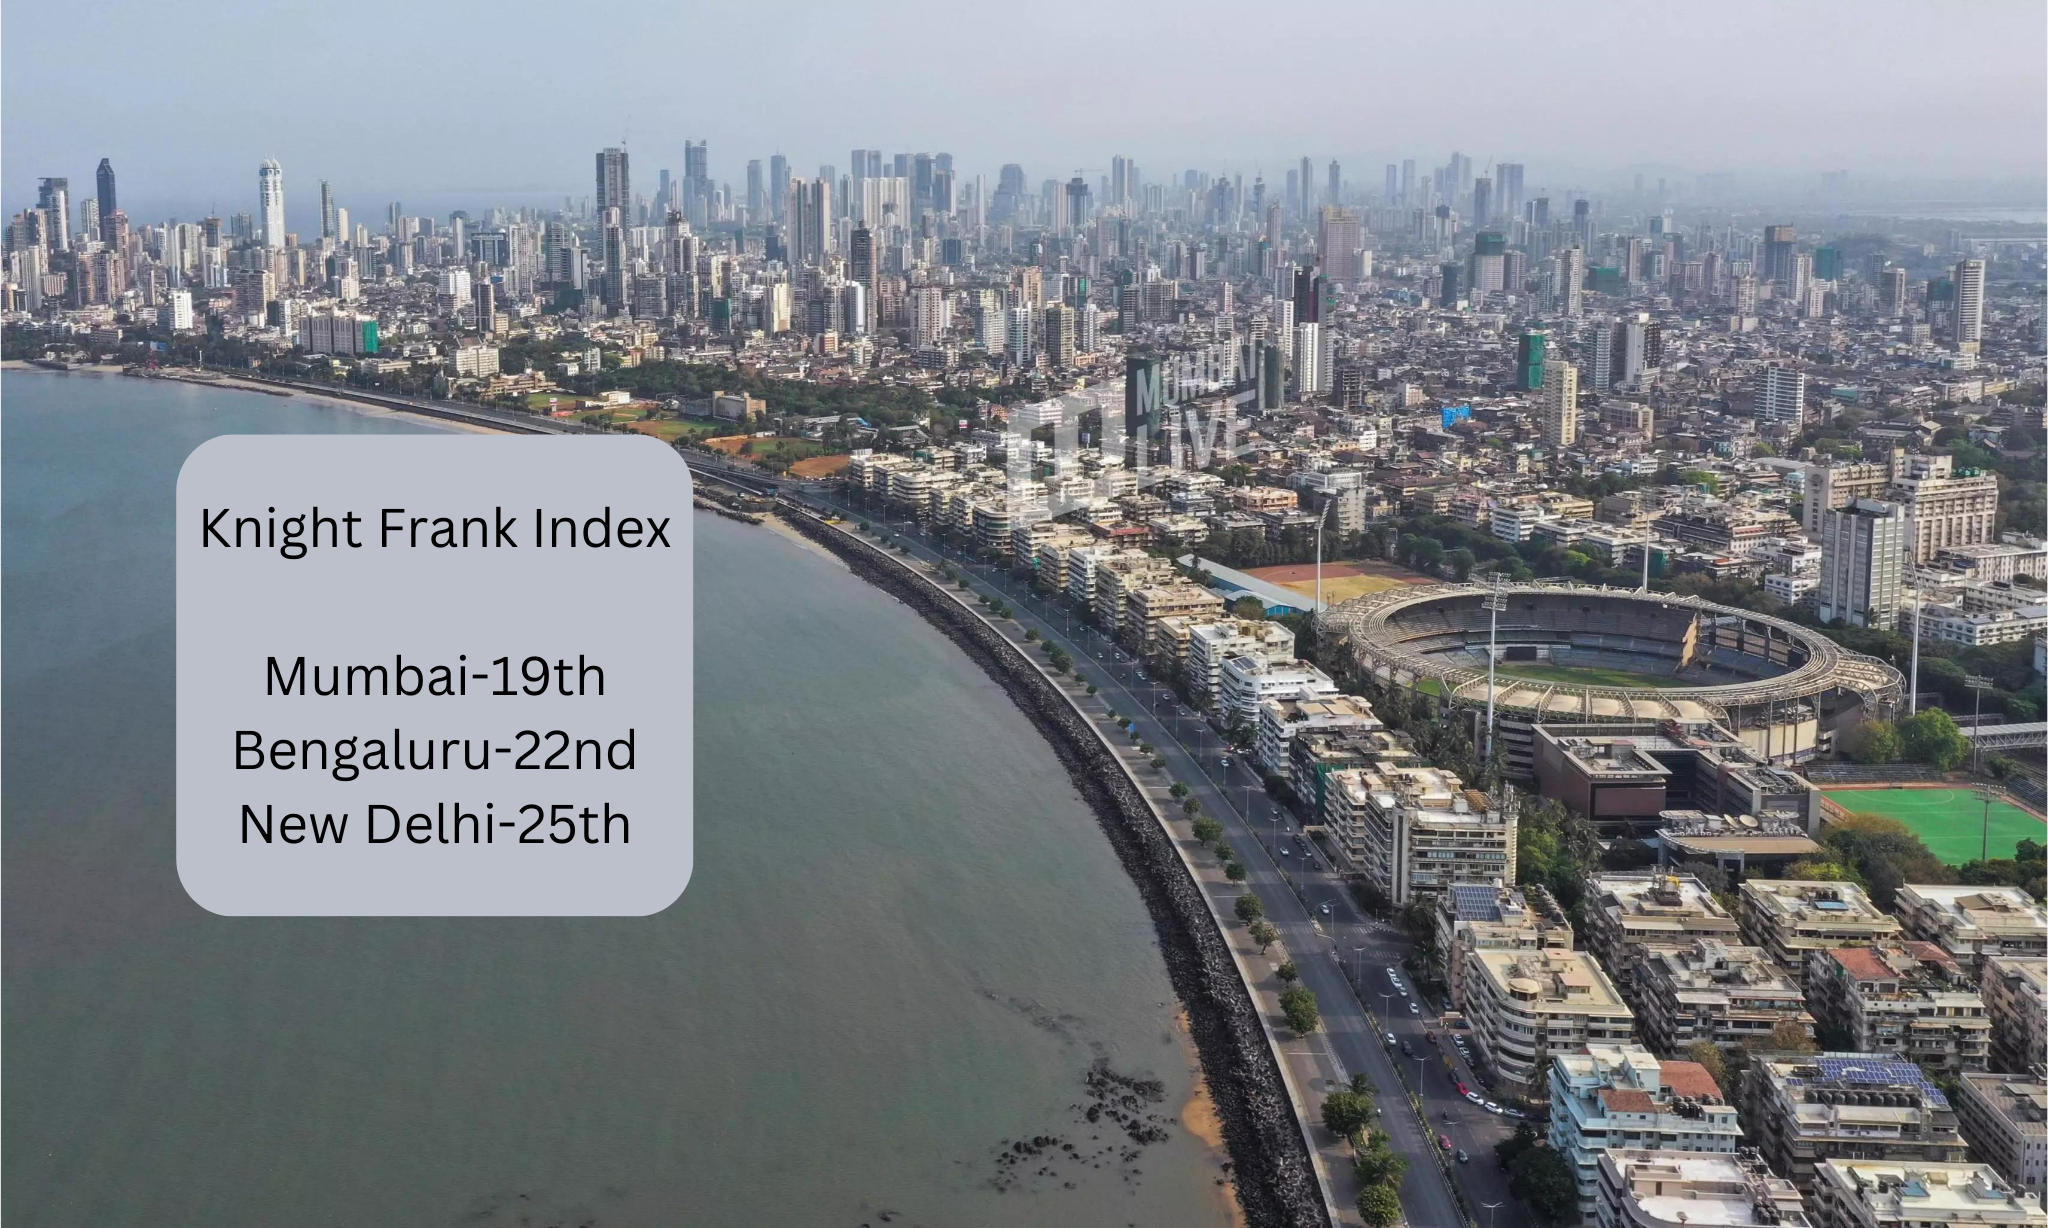 Mumbai Secures 19th Spot, Bengaluru 22nd And New Delhi 25th In The Knight Frank Index